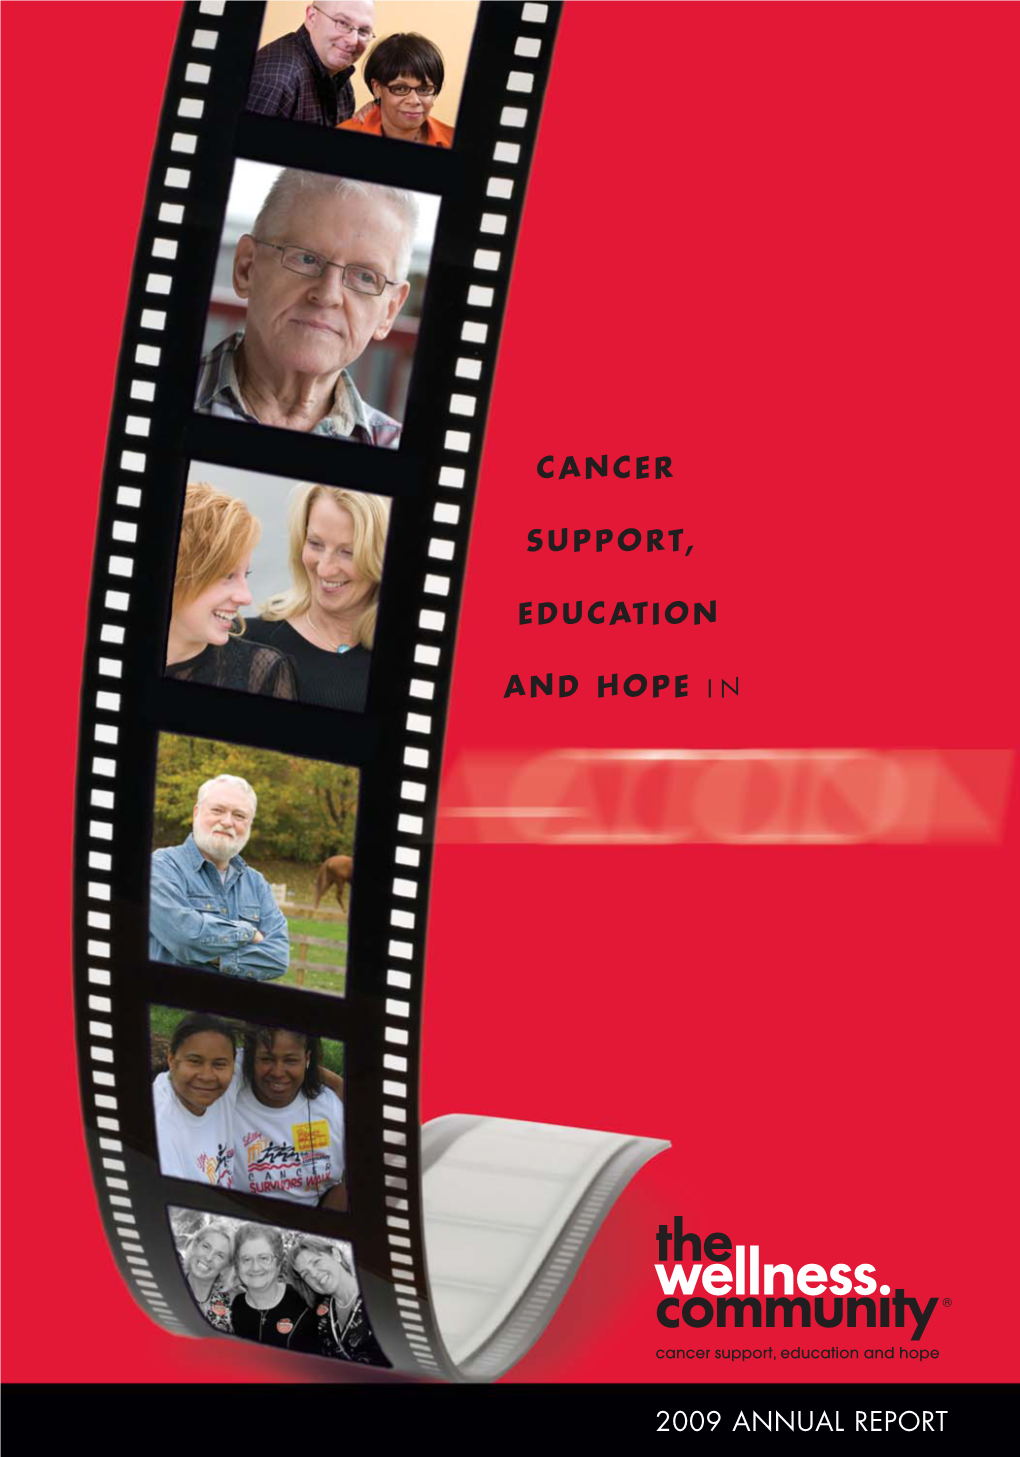 Cancer Support, Education and Hope